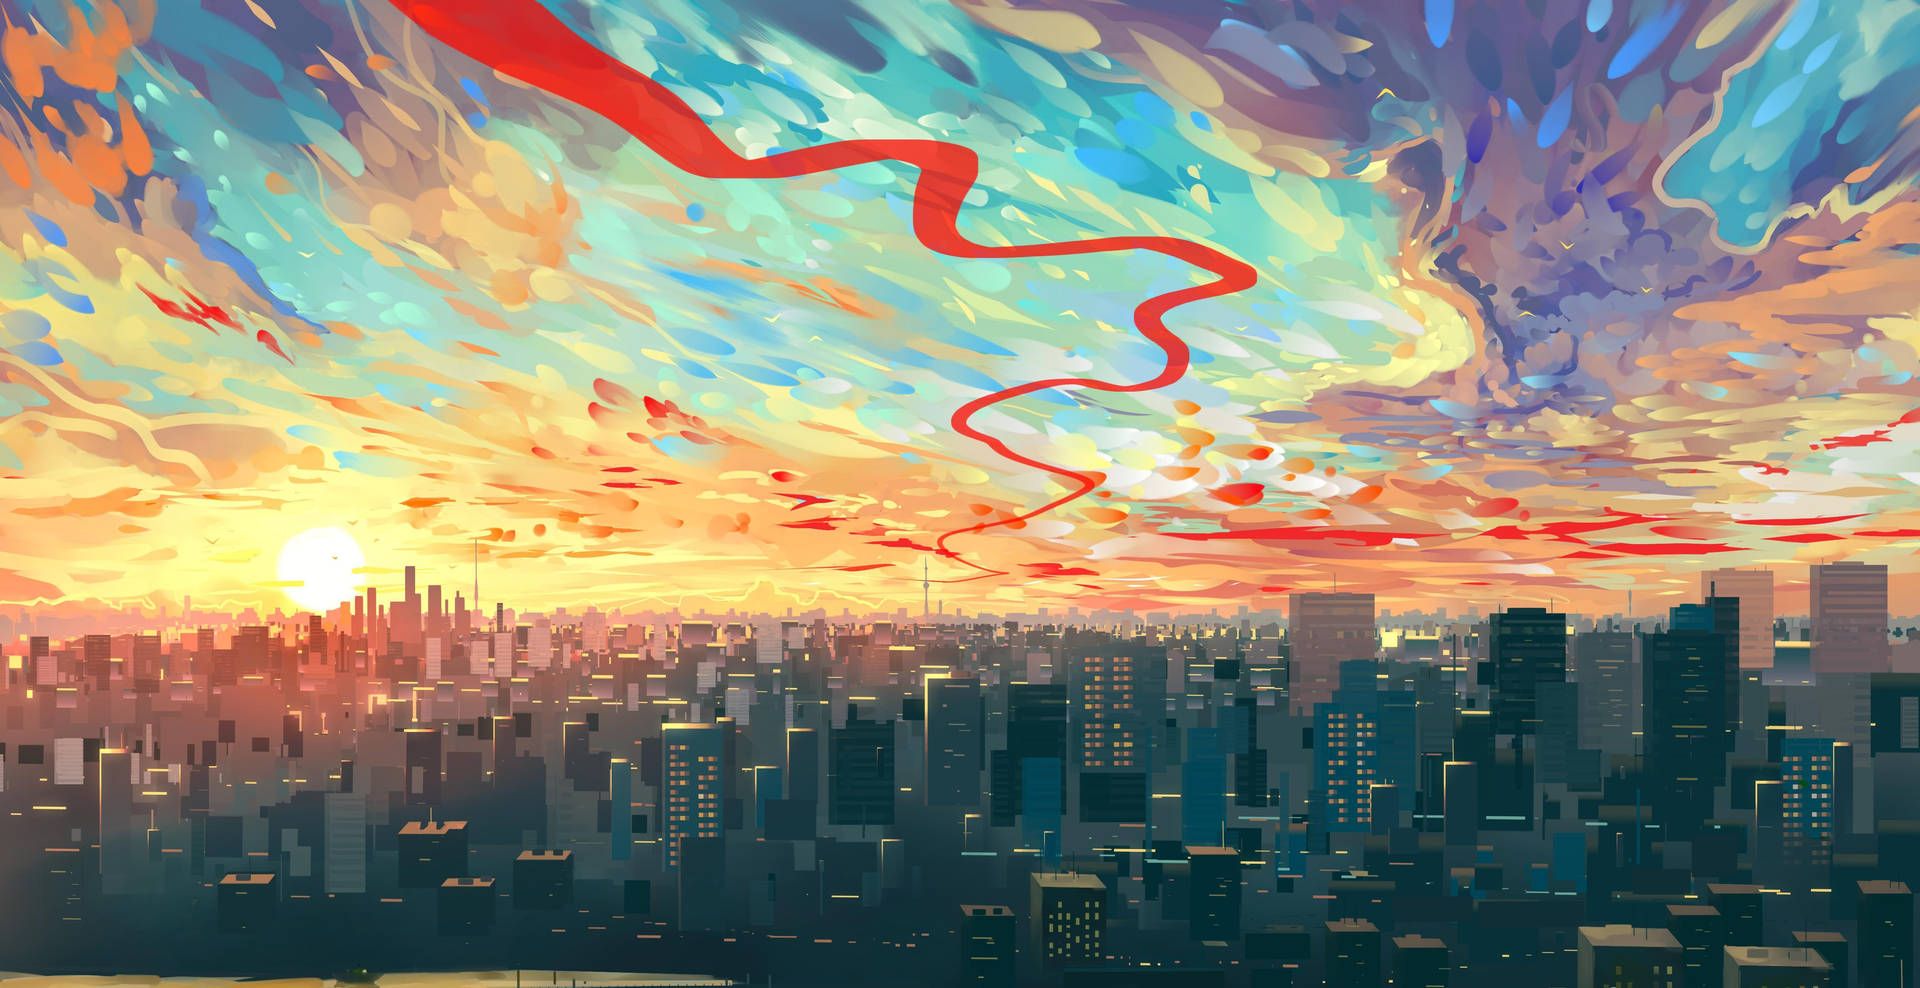 Digital painting of a cityscape with a red kite flying in the sky - Street art